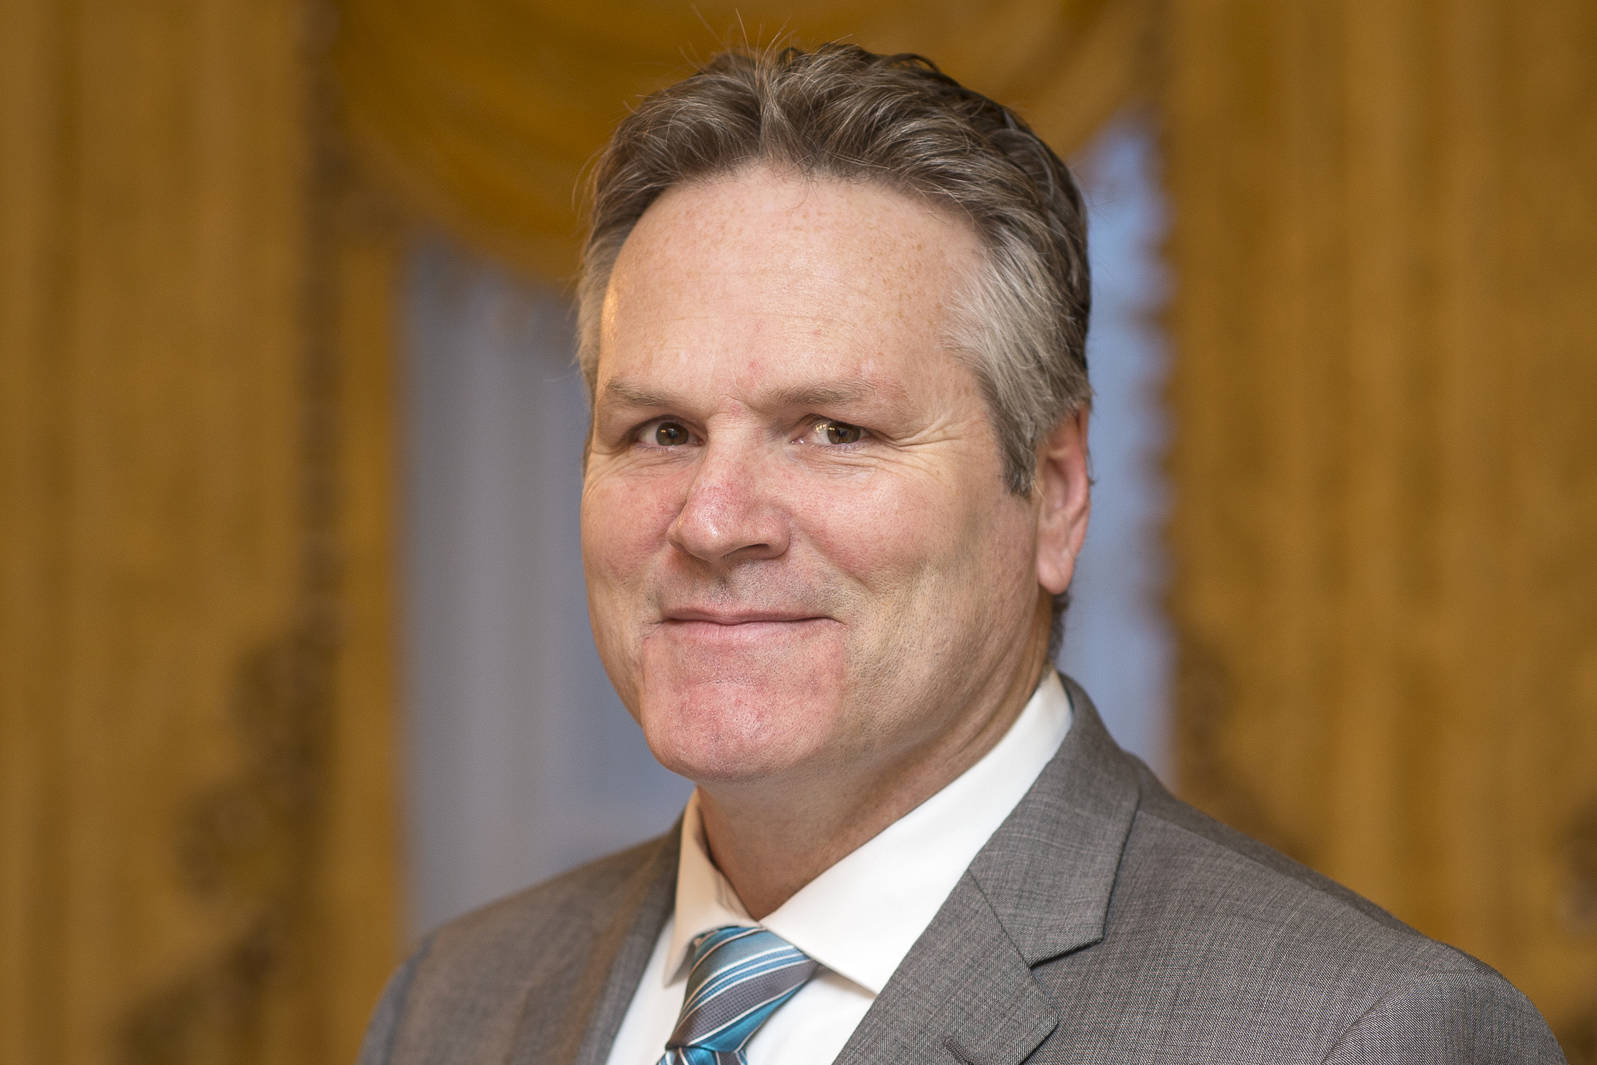 Opinion: Gov. Dunleavy follows through on campaign commitments